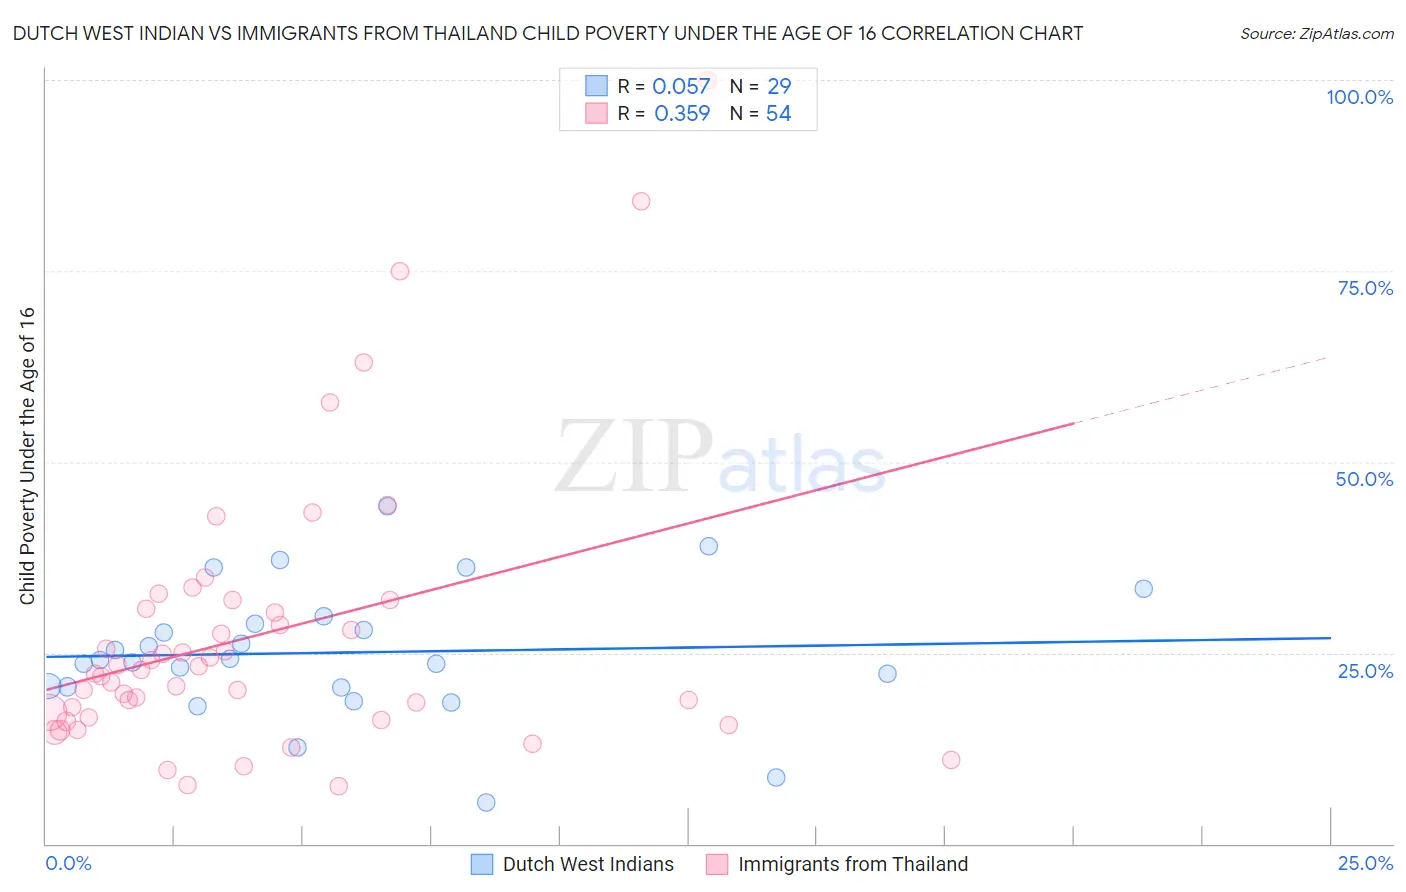 Dutch West Indian vs Immigrants from Thailand Child Poverty Under the Age of 16